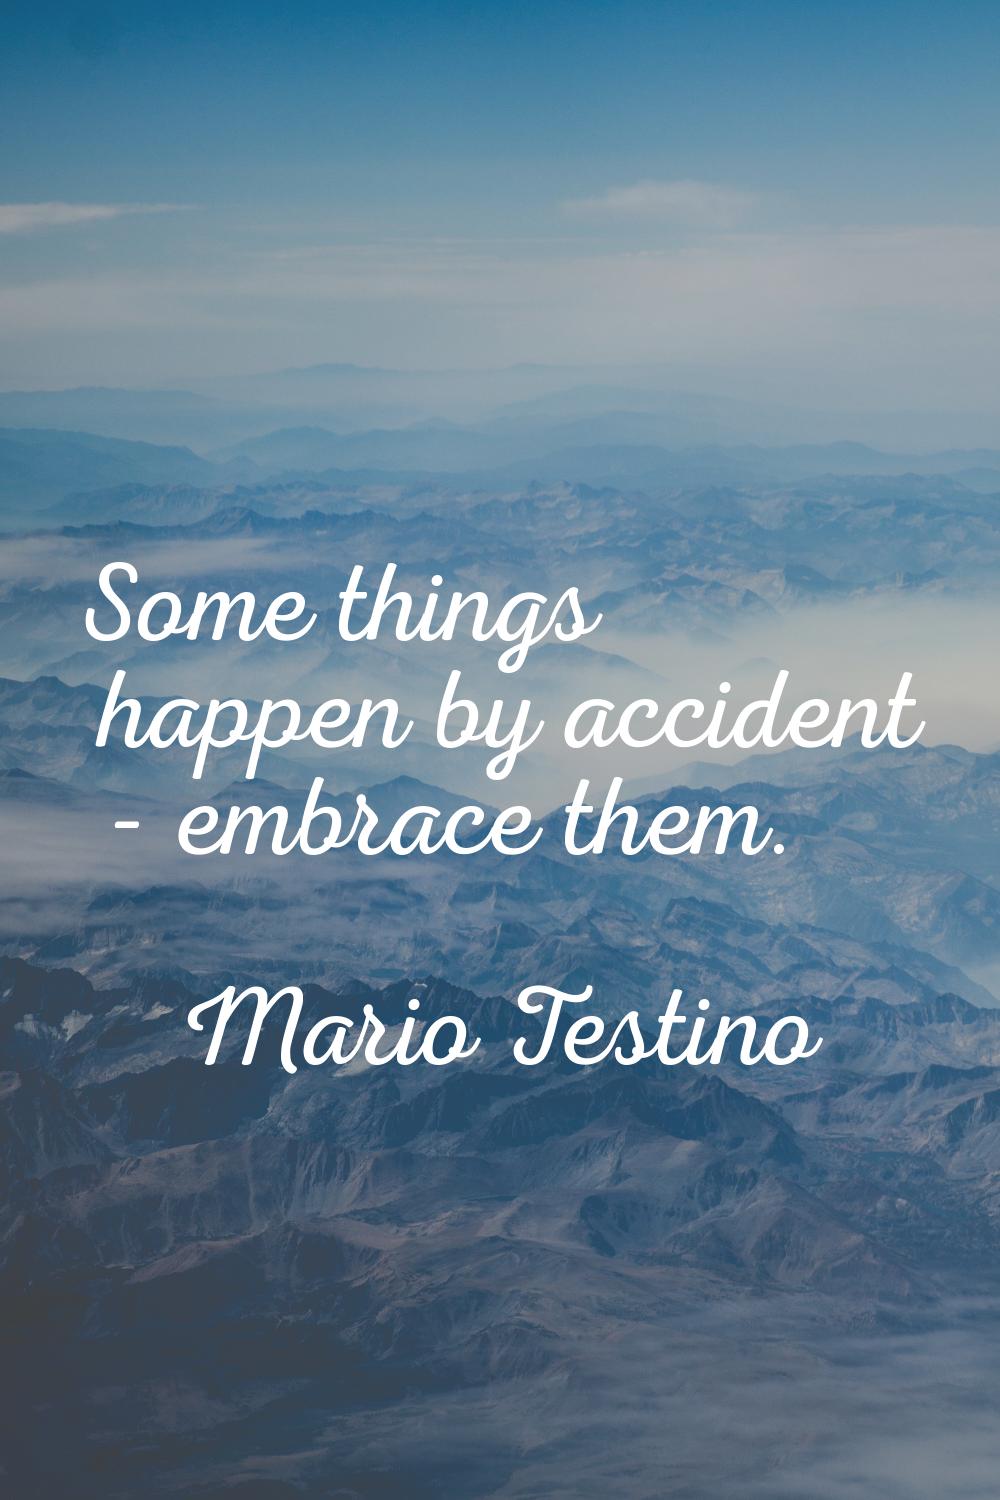 Some things happen by accident - embrace them.